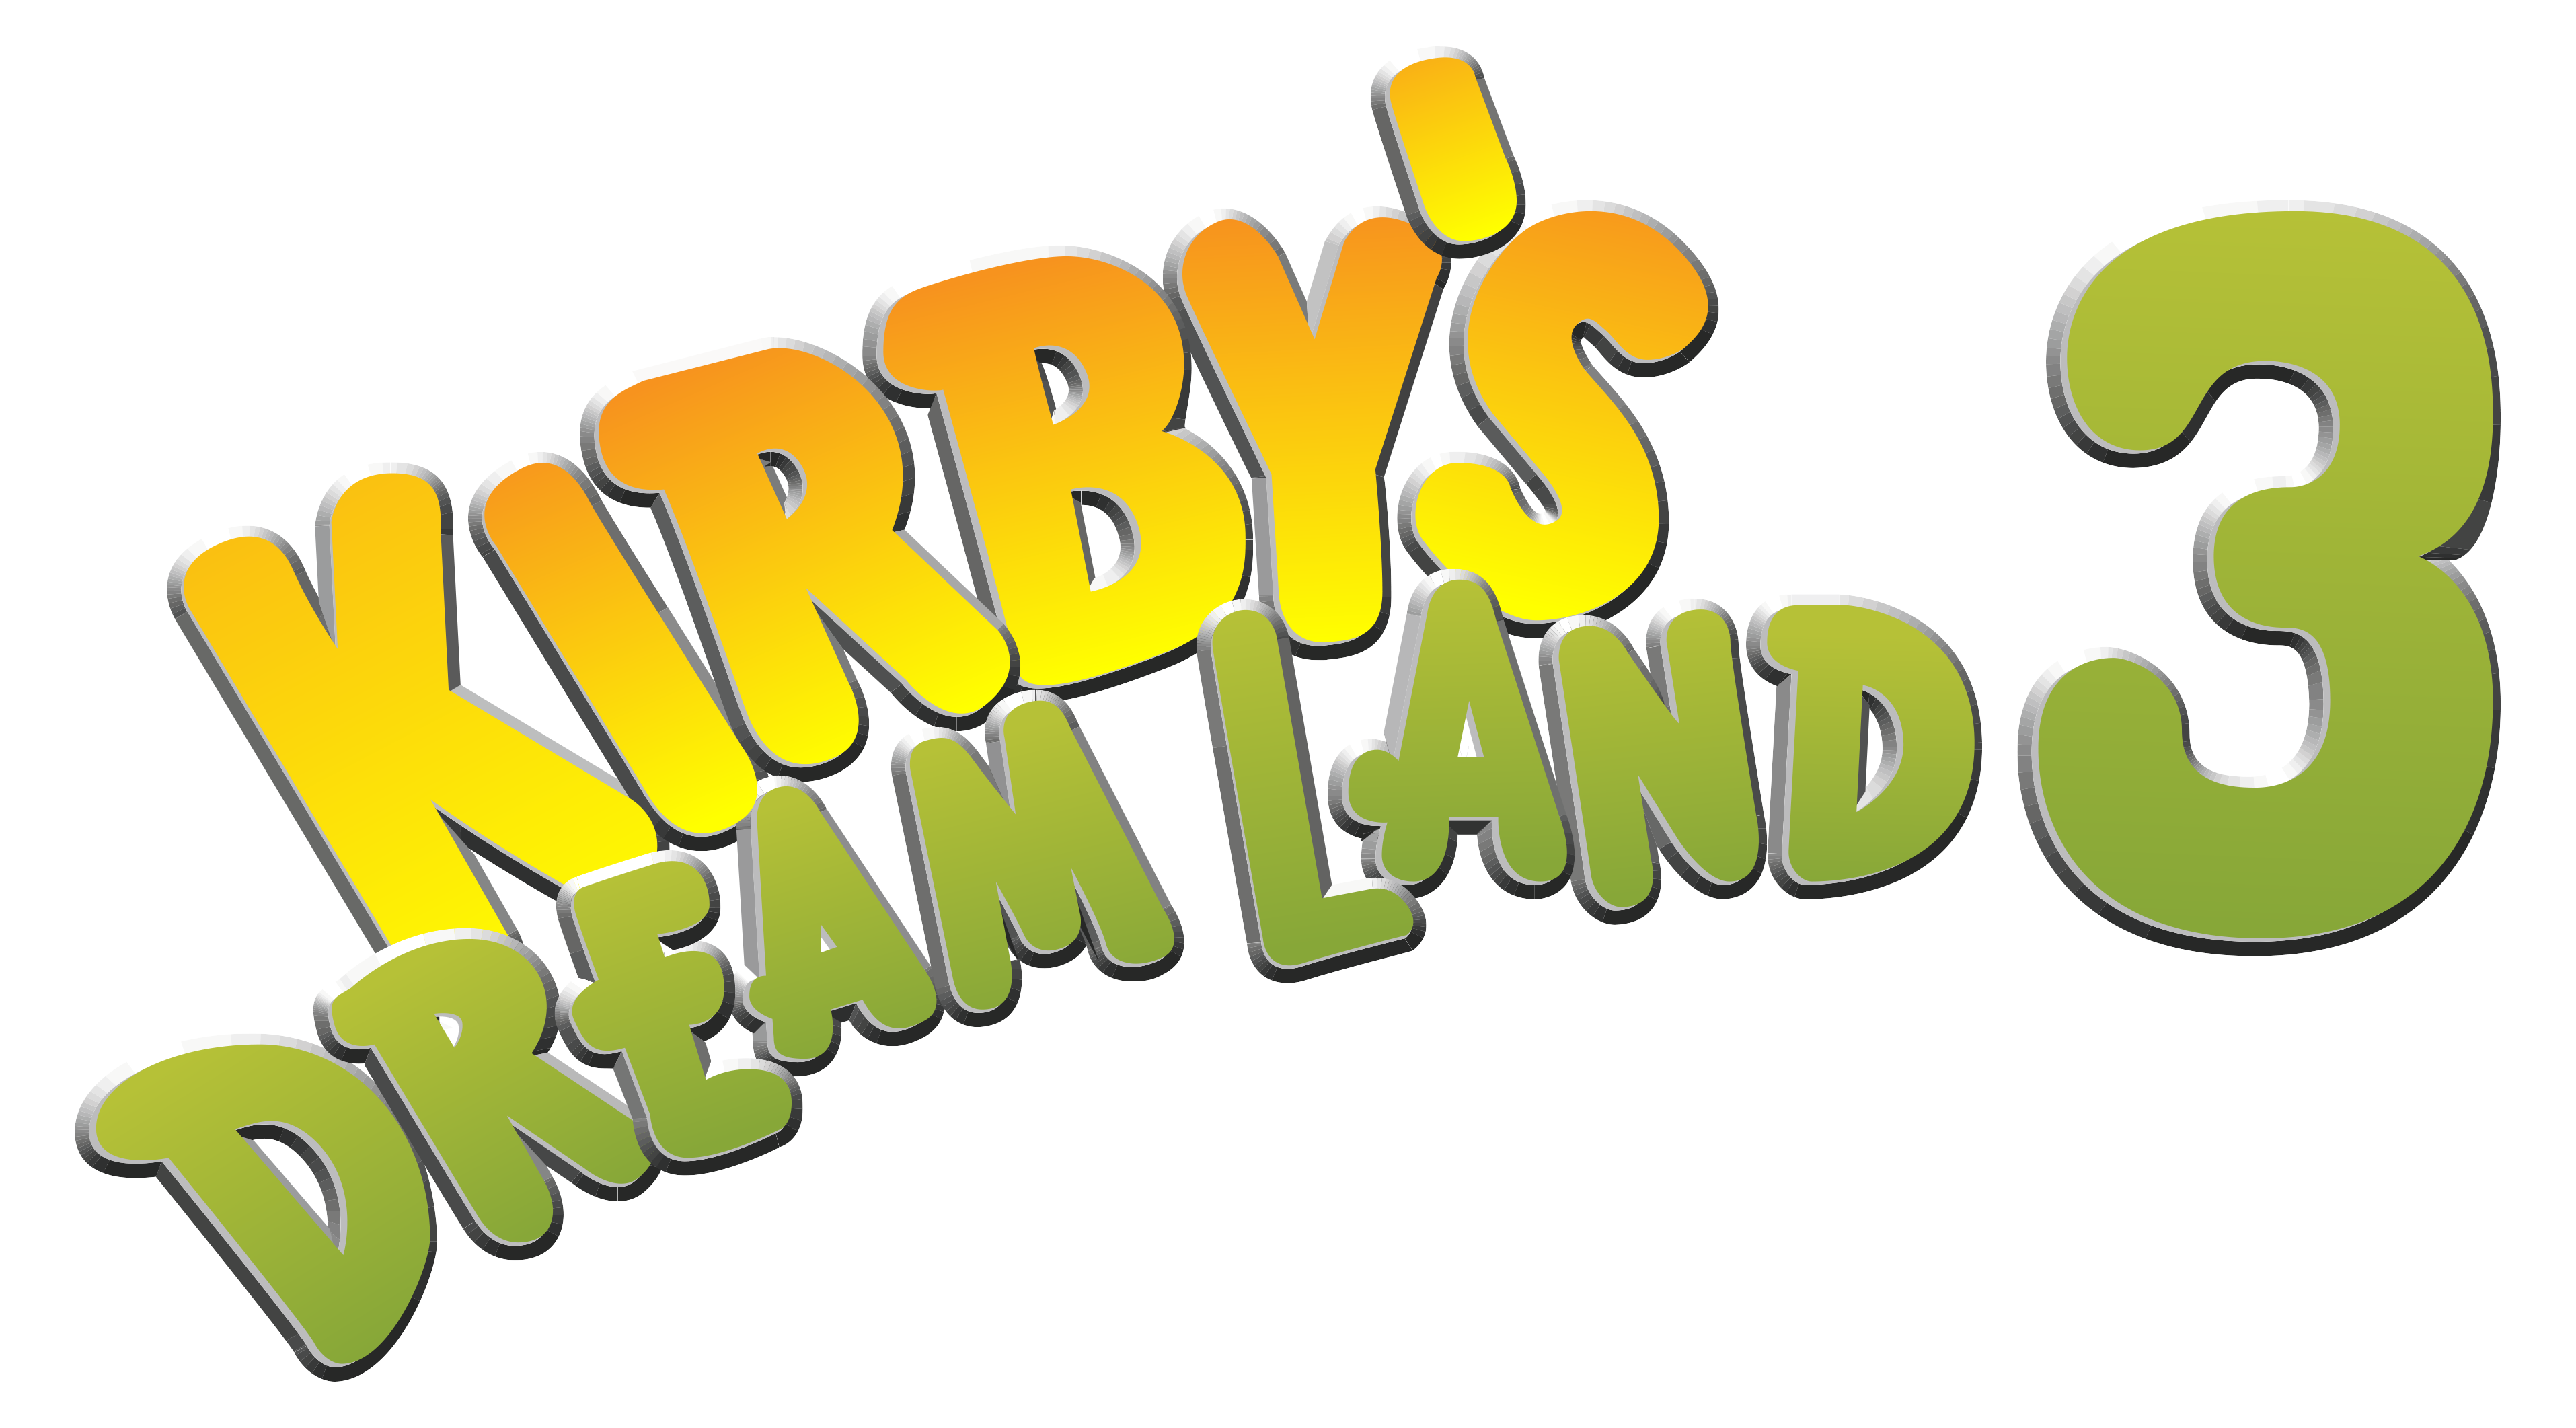  Kirby's Dream Land 3 : Video Games